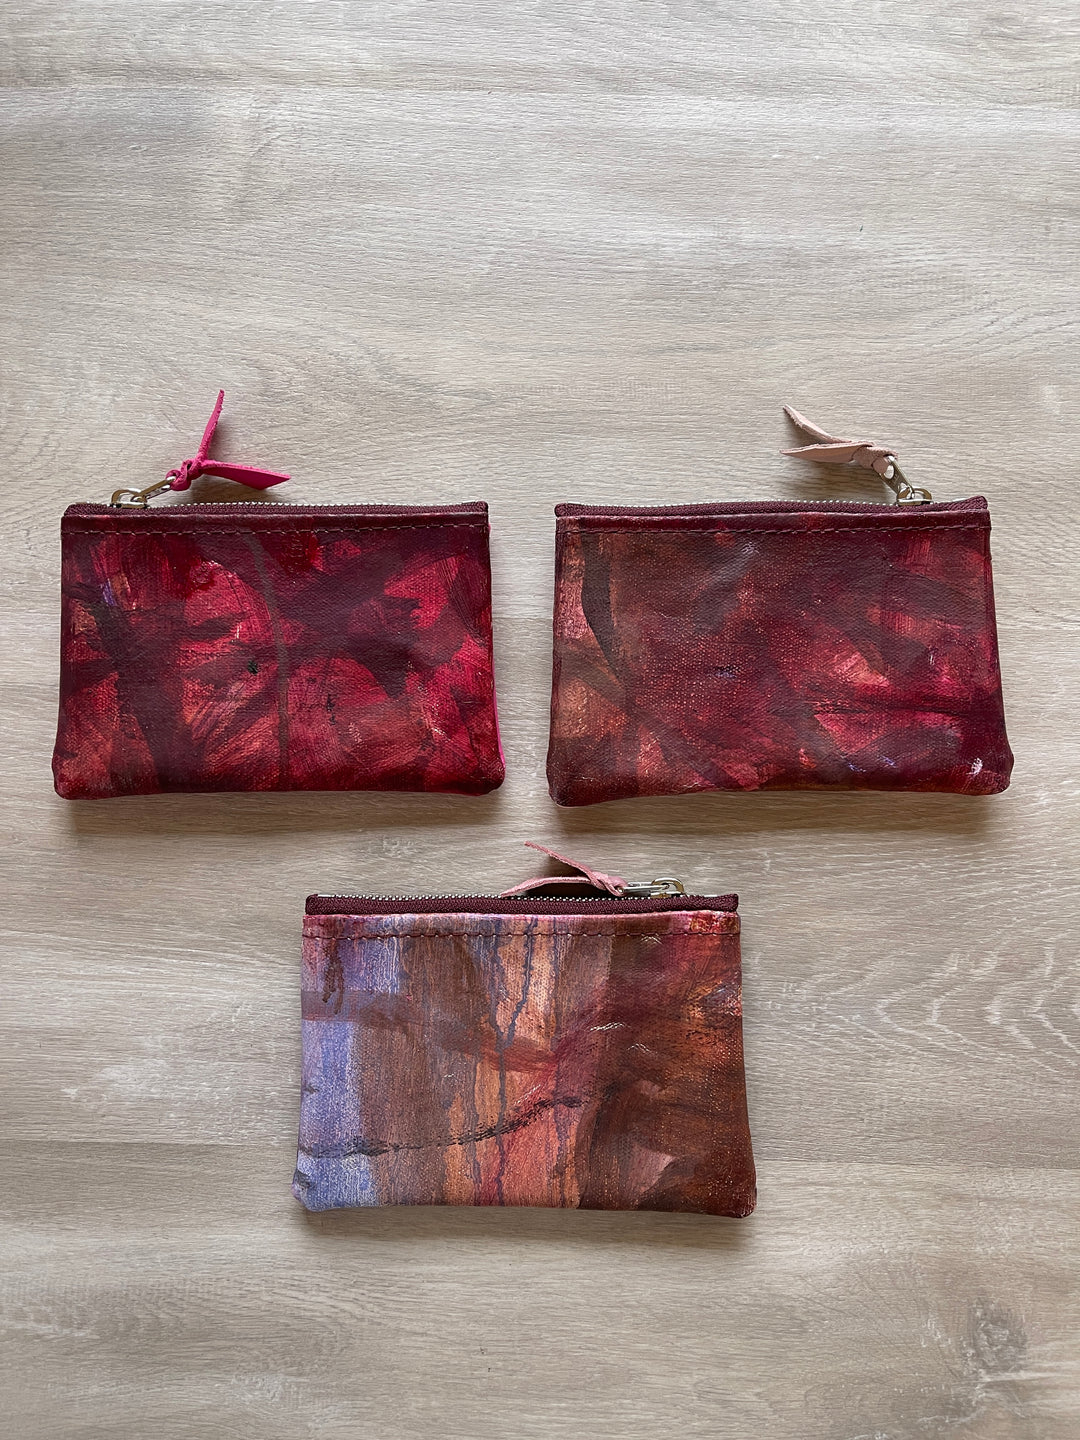 Small Valet pouch - Painted Canvas - One of a Kind